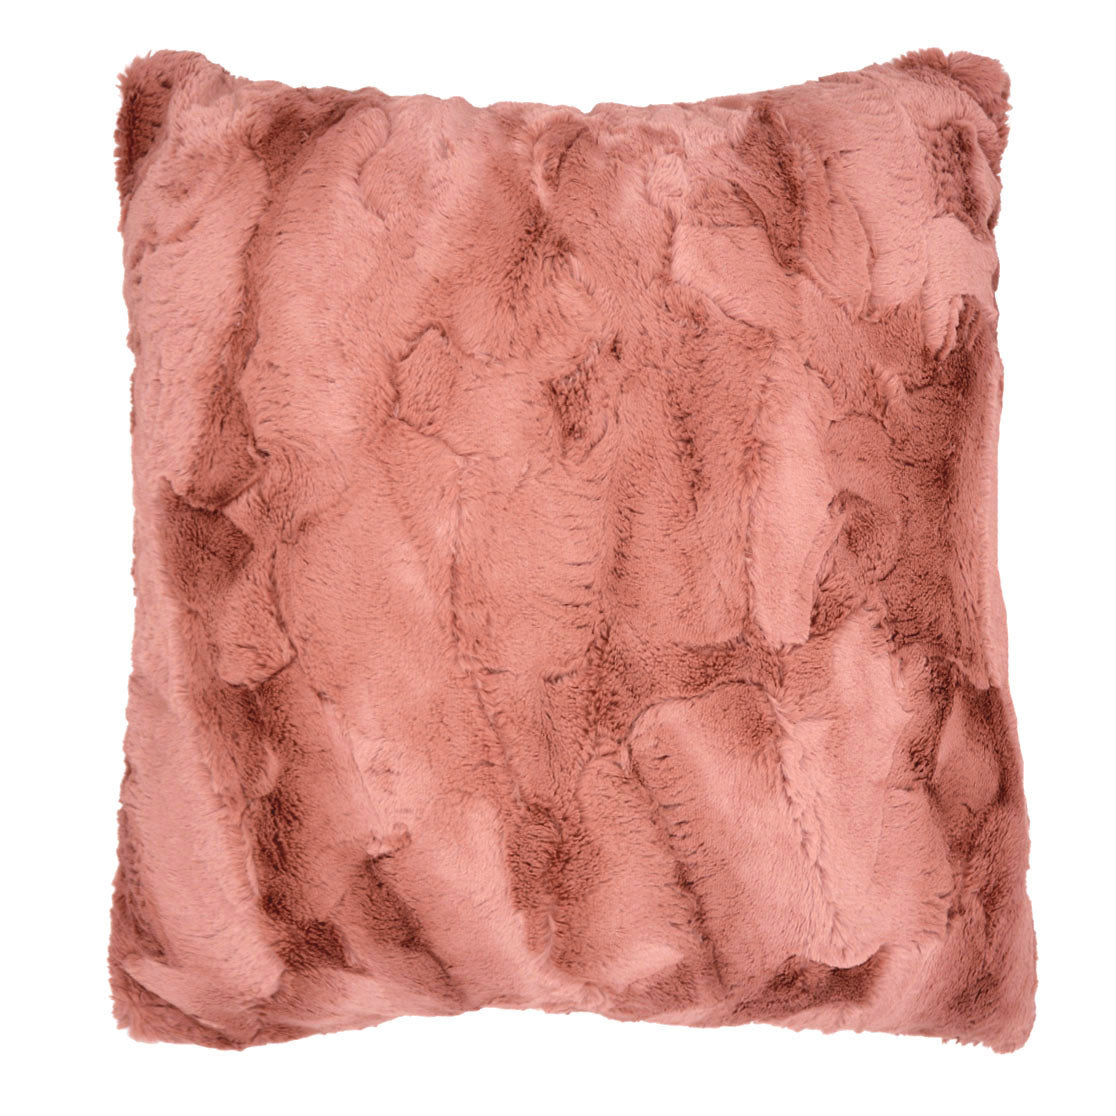 Pillow Sham in Cuddly Copper River Faux Fur | Handmade in Seattle WA | Pandemonium Millinery